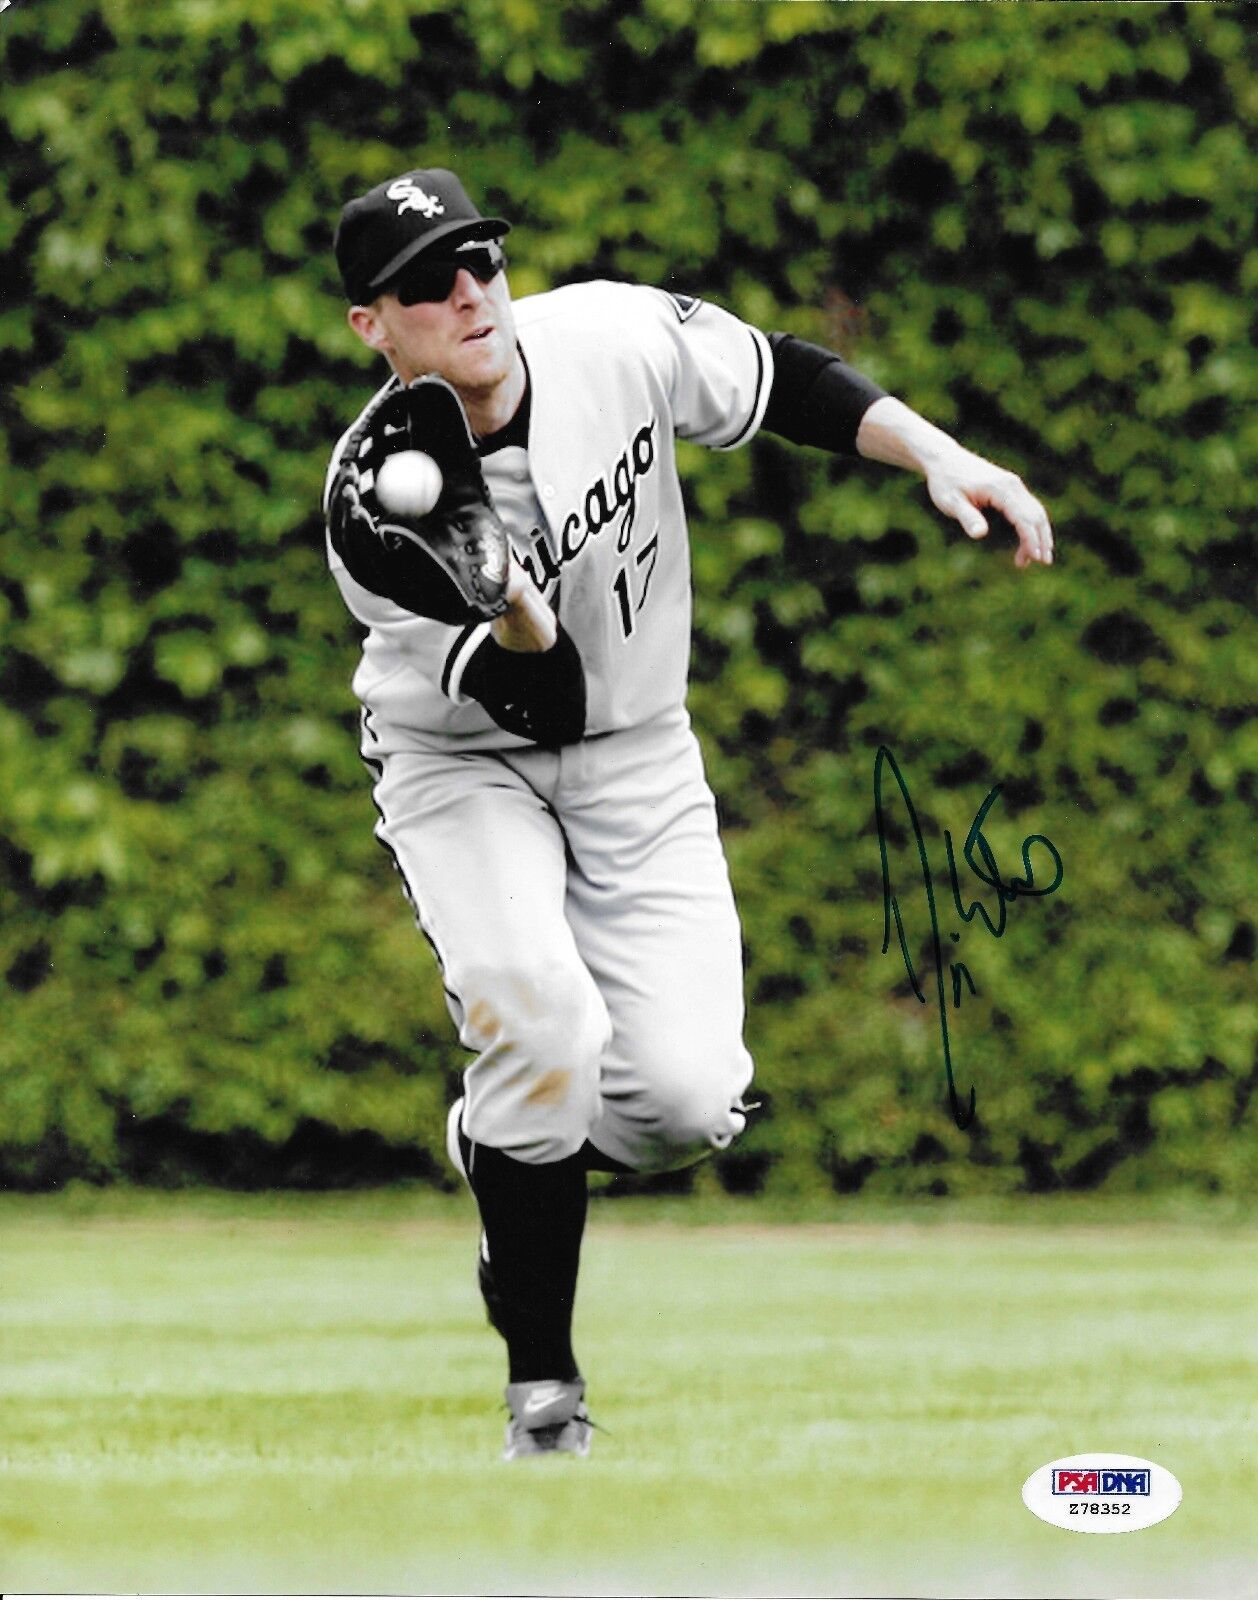 Darin Erstad Signed White Sox Baseball 8x10 Photo Poster painting PSA/DNA COA Picture Autograph